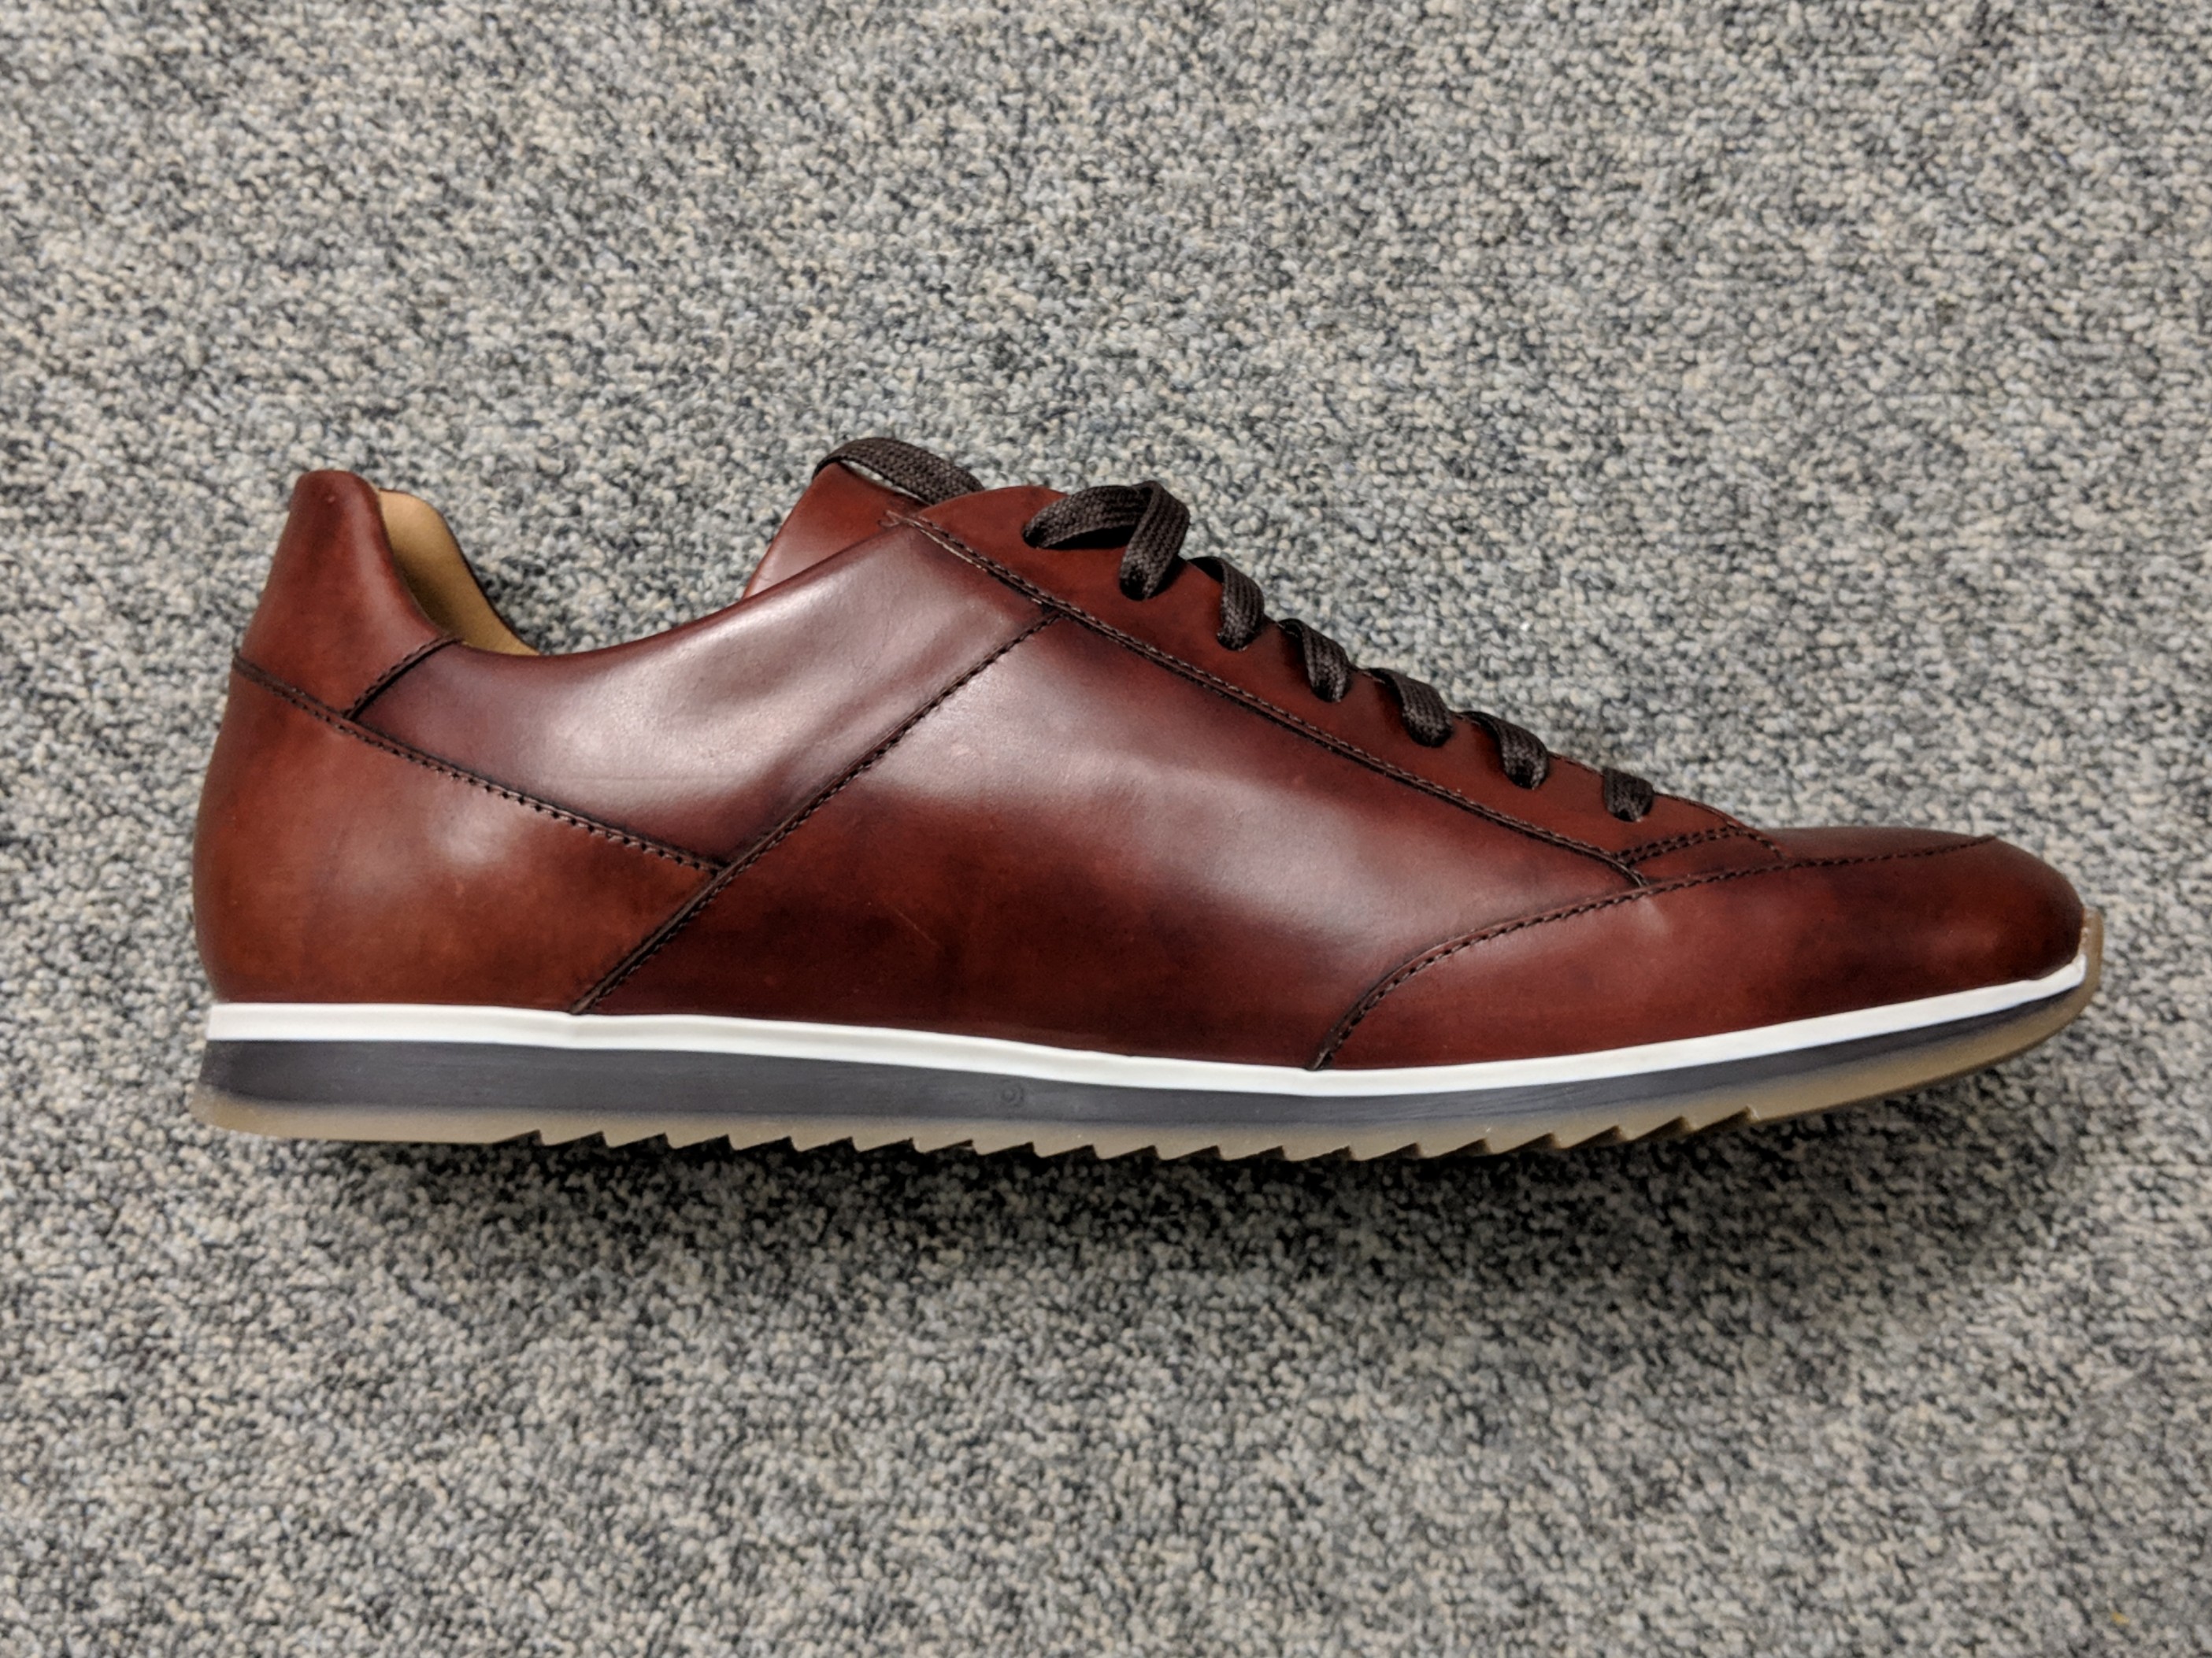 Magnanni Leather Sneakers 43, Men's 